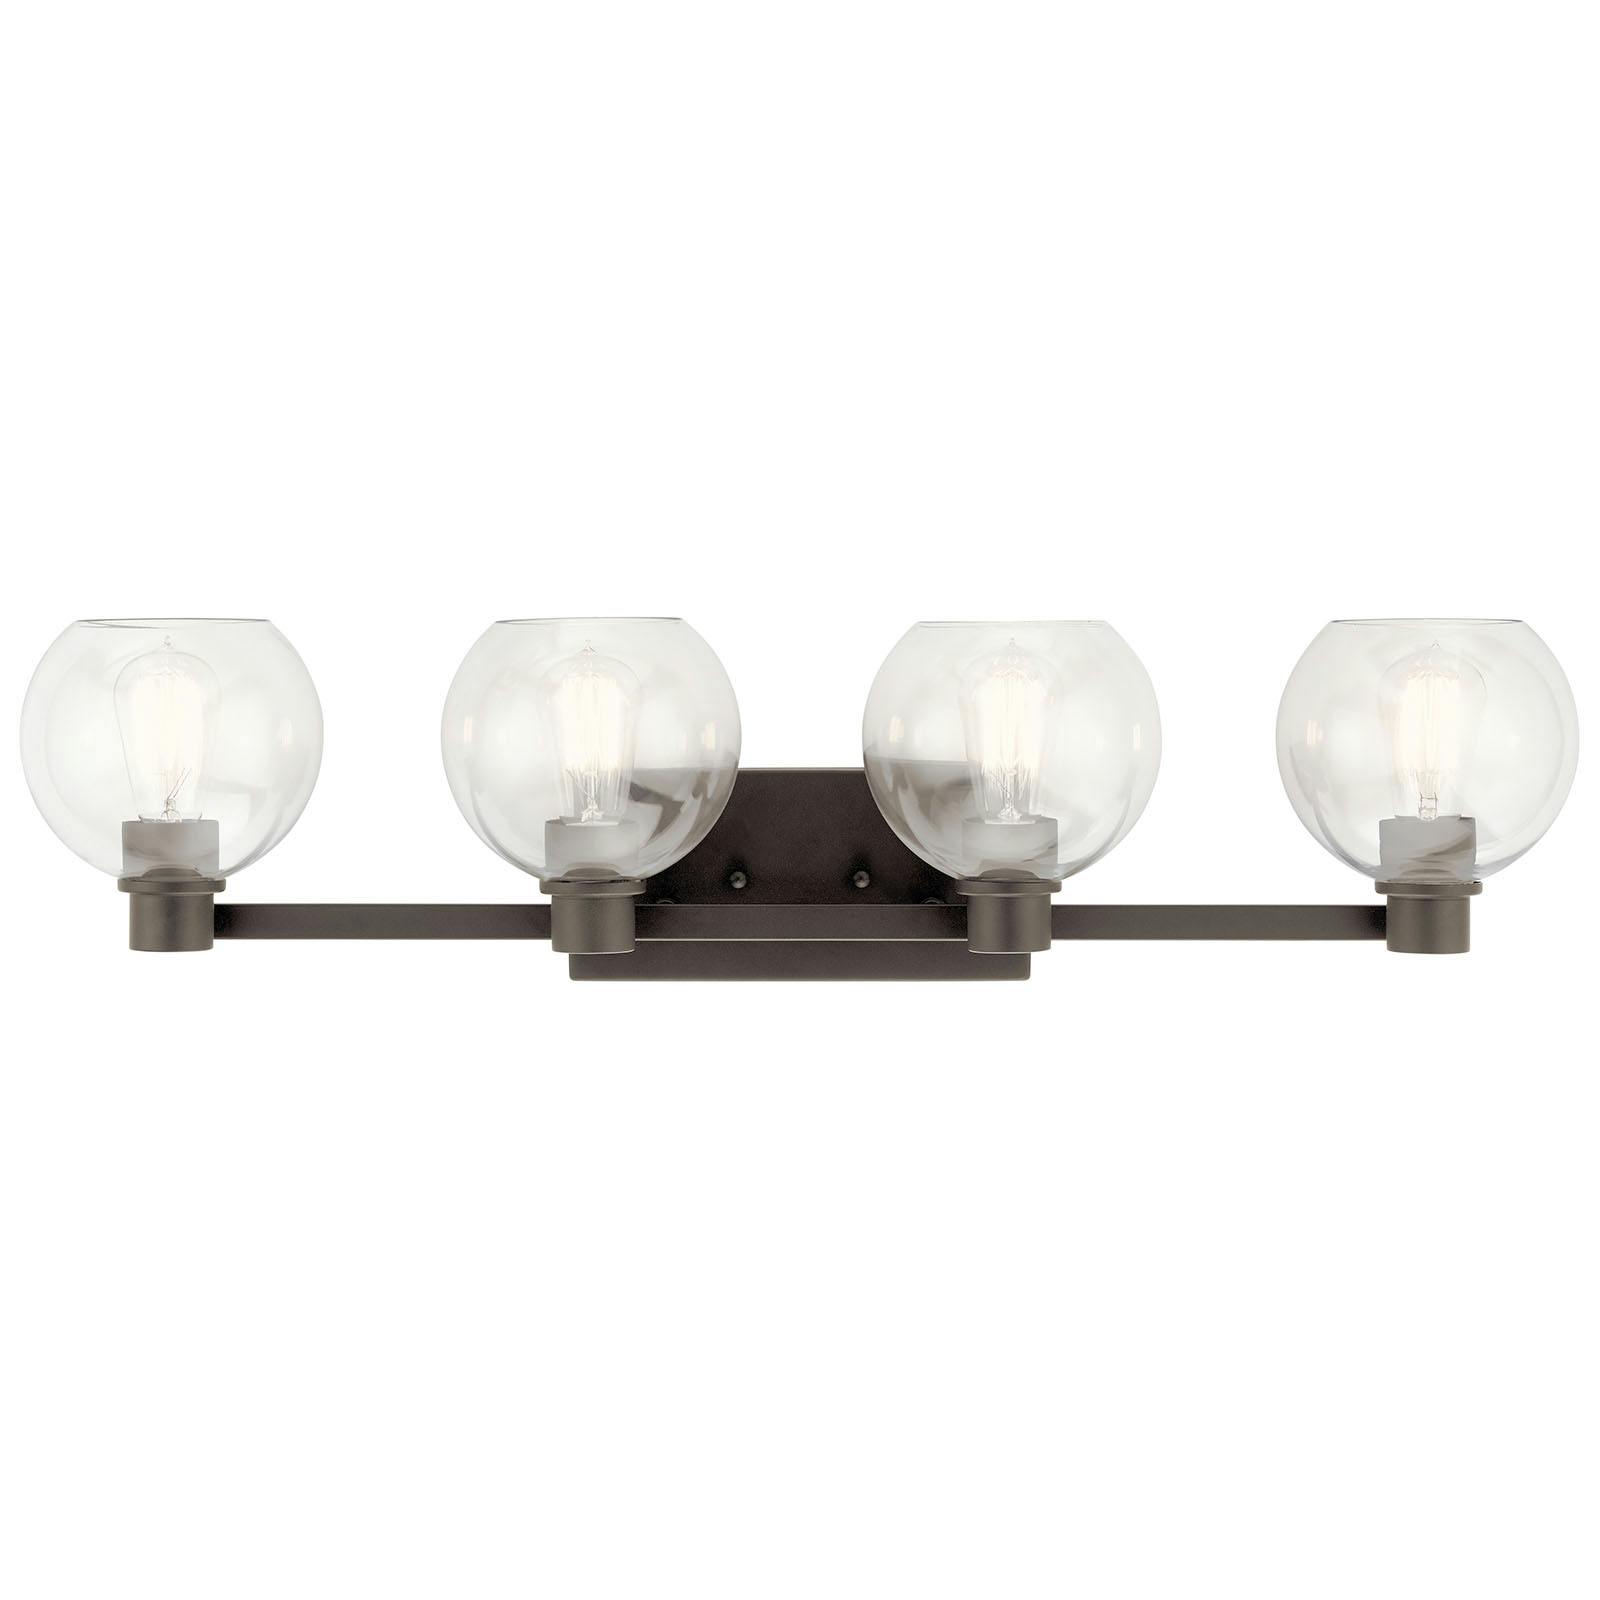 The Harmony 4 Light Vanity Light Olde Bronze® facing up on a white background